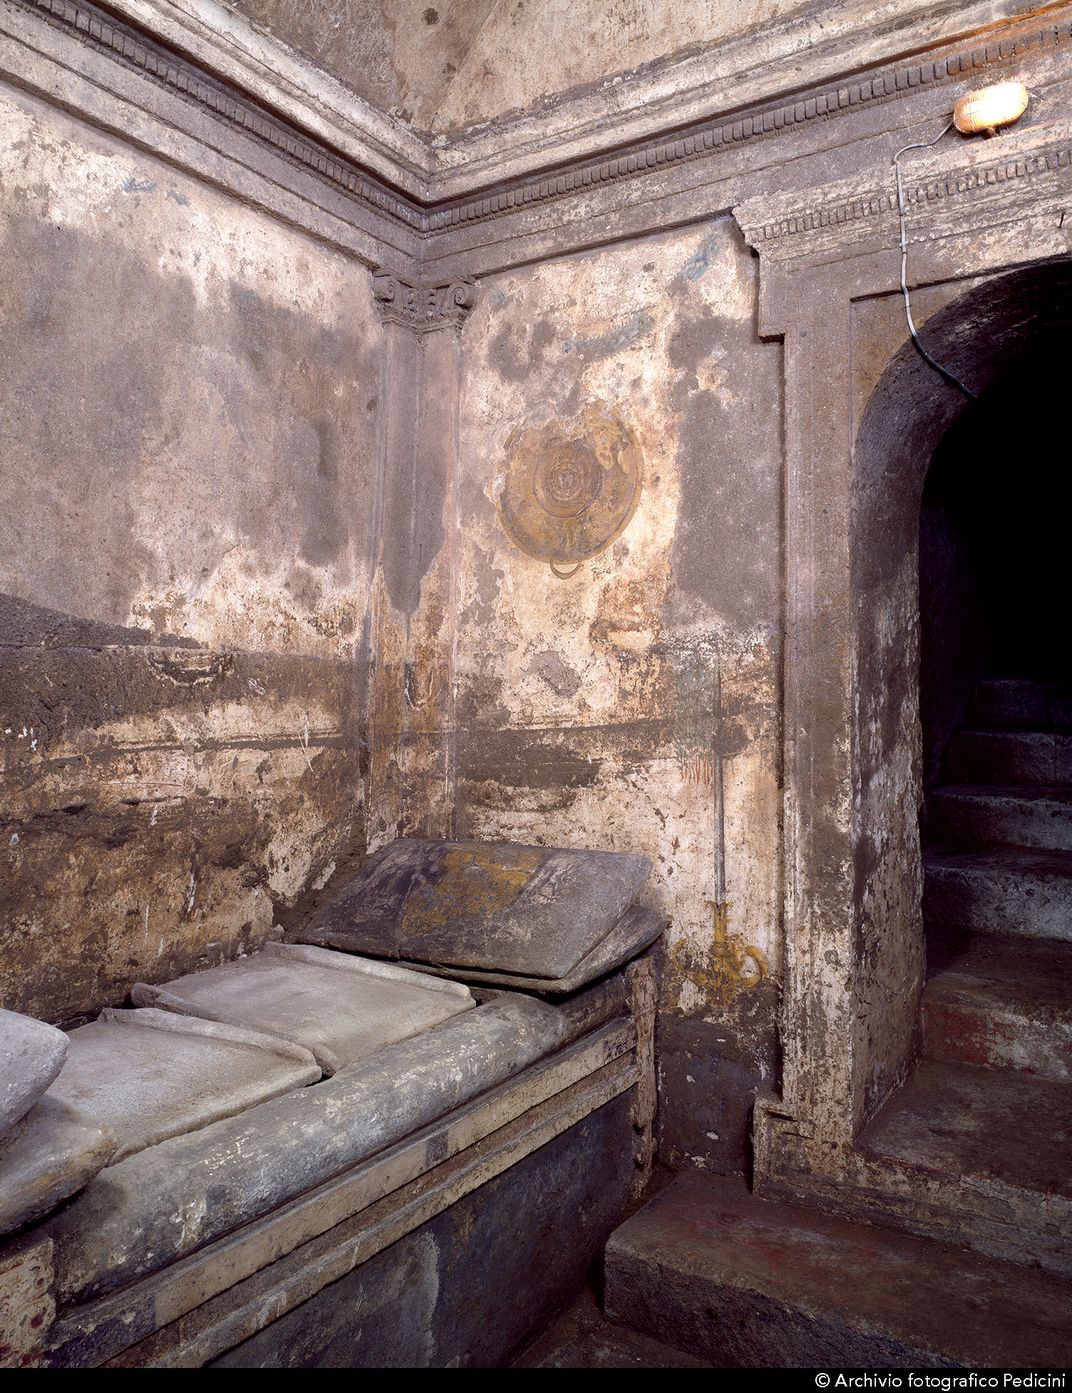 Rock-cut "bed" and "pillows" in the Naples tomb